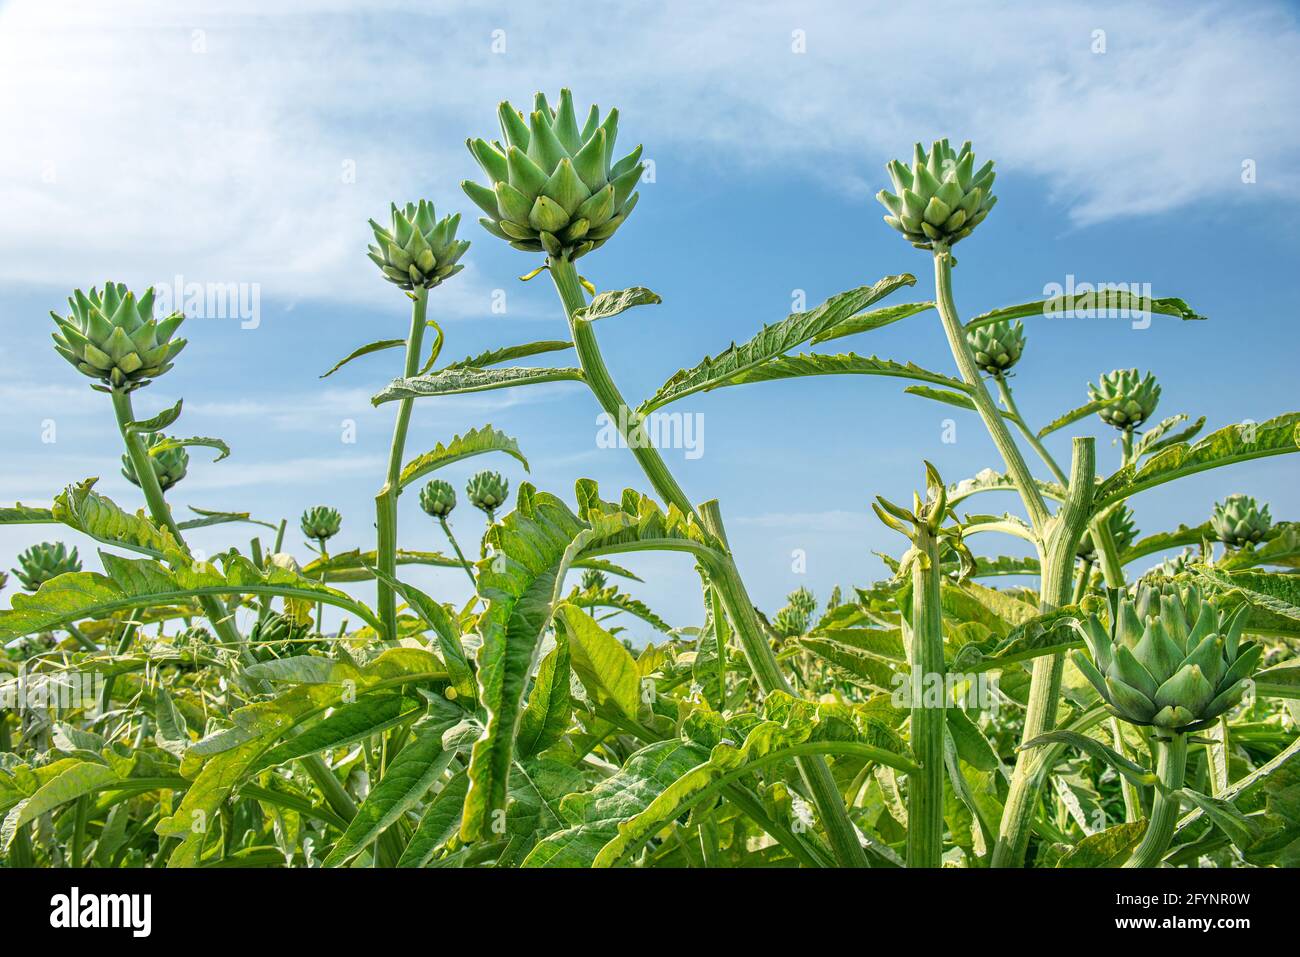 Green artichokes growing up in a field against blue sky background Stock Photo